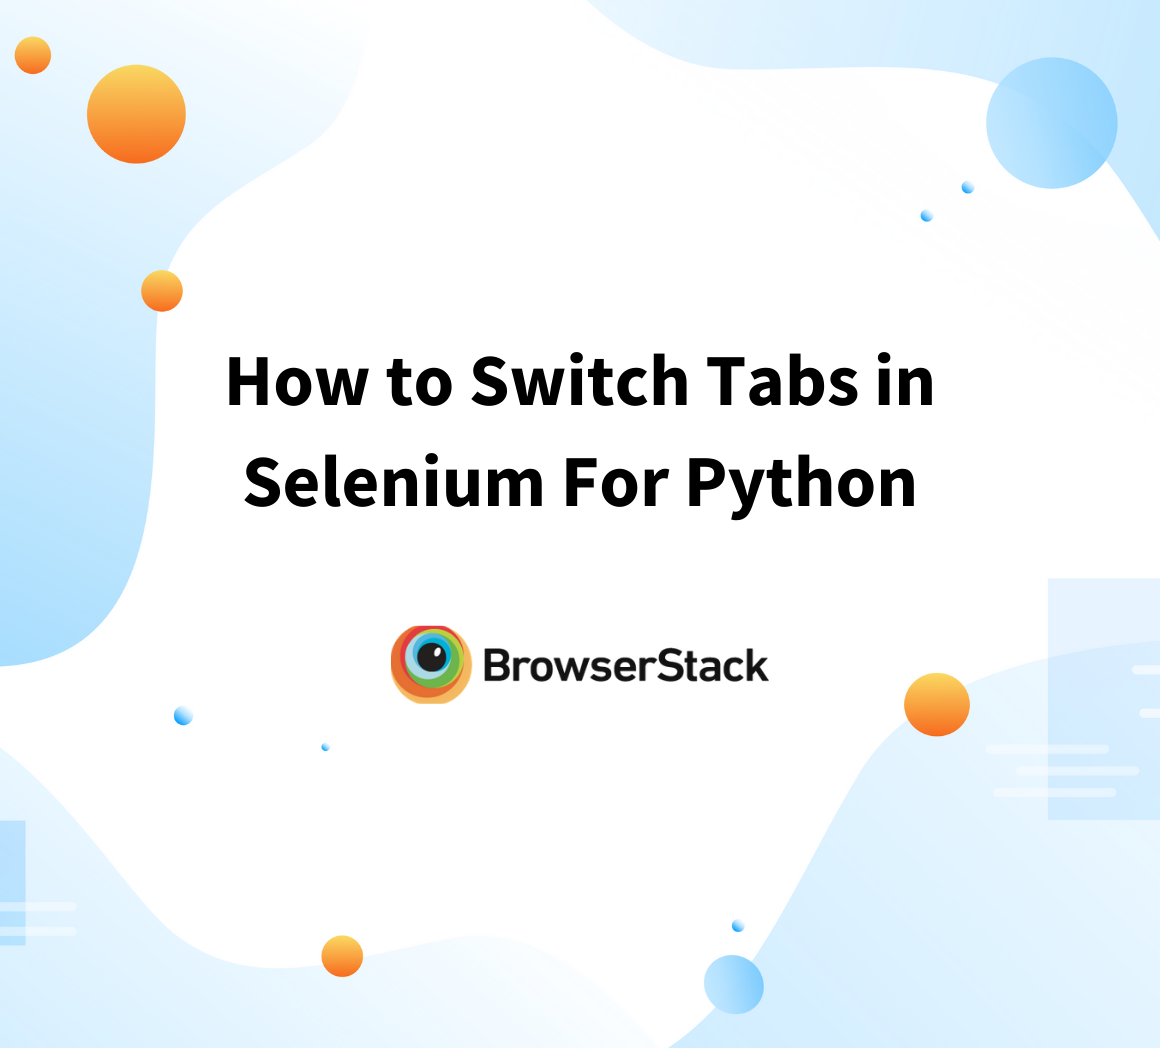 How to switch tabs in Selenium for Python